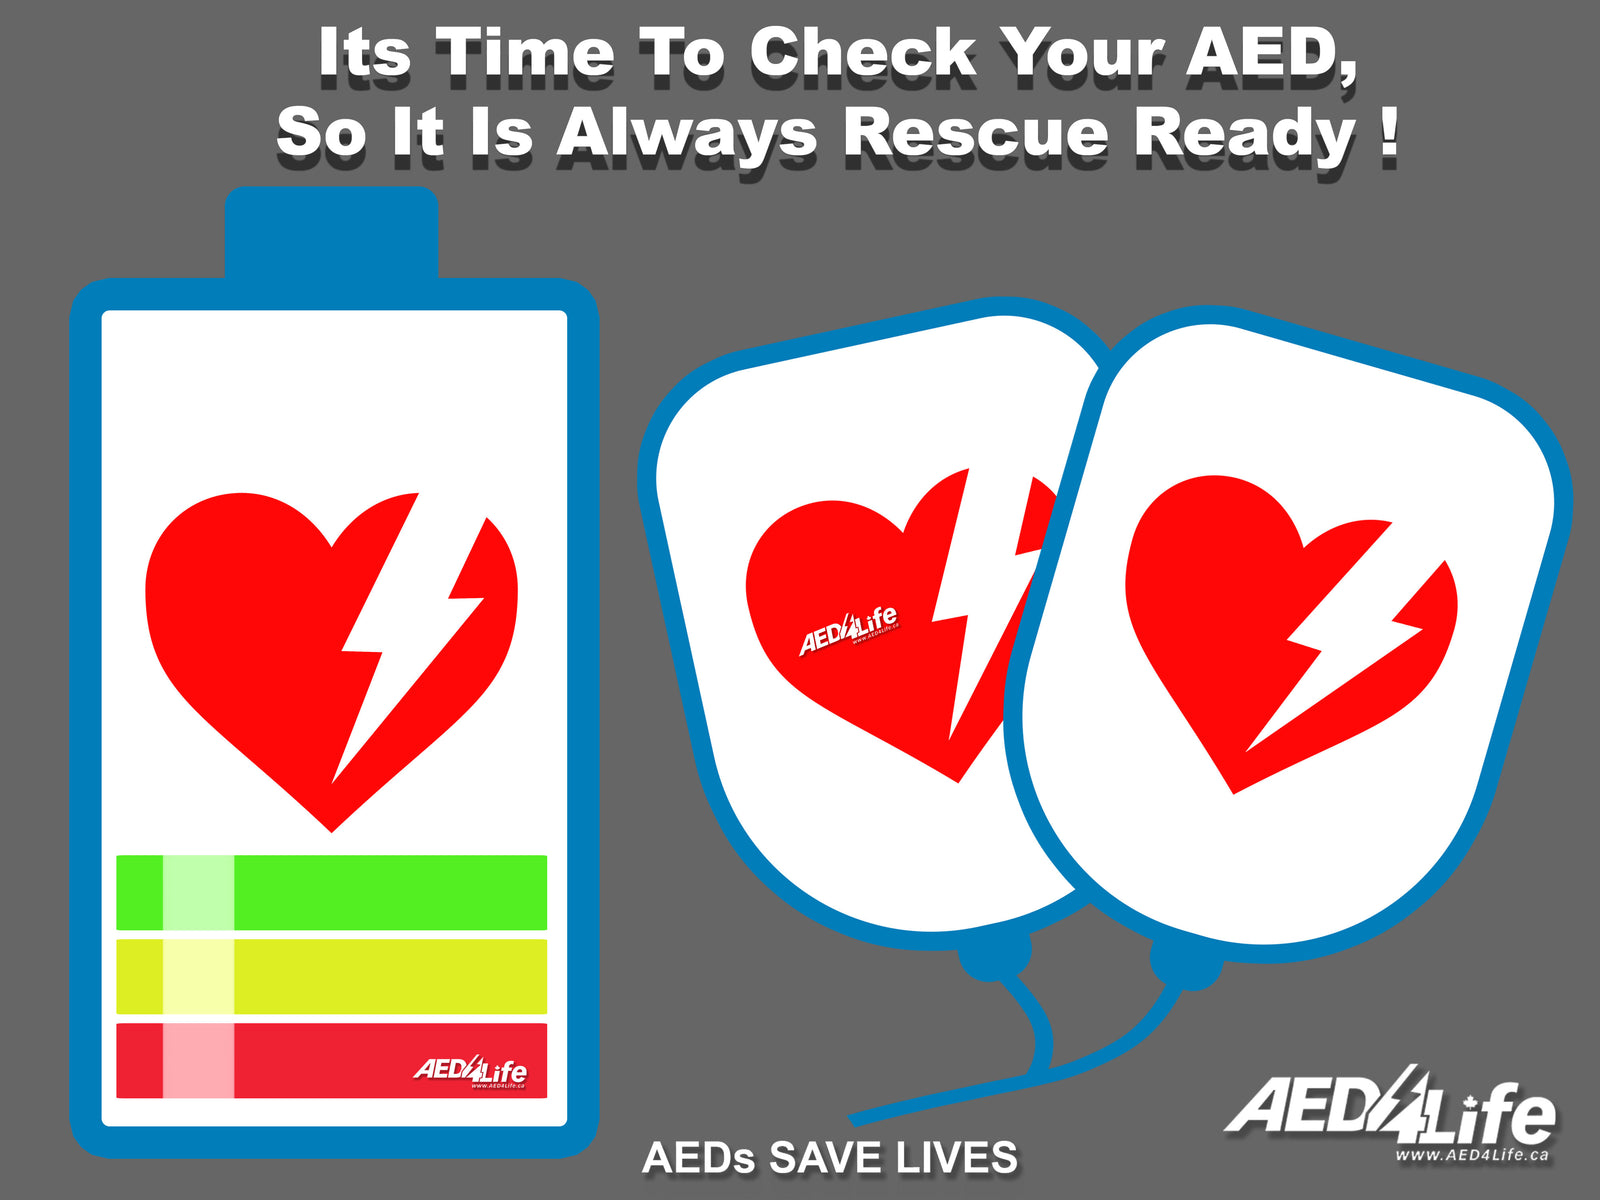 Maintaining your AED pads and batteries.